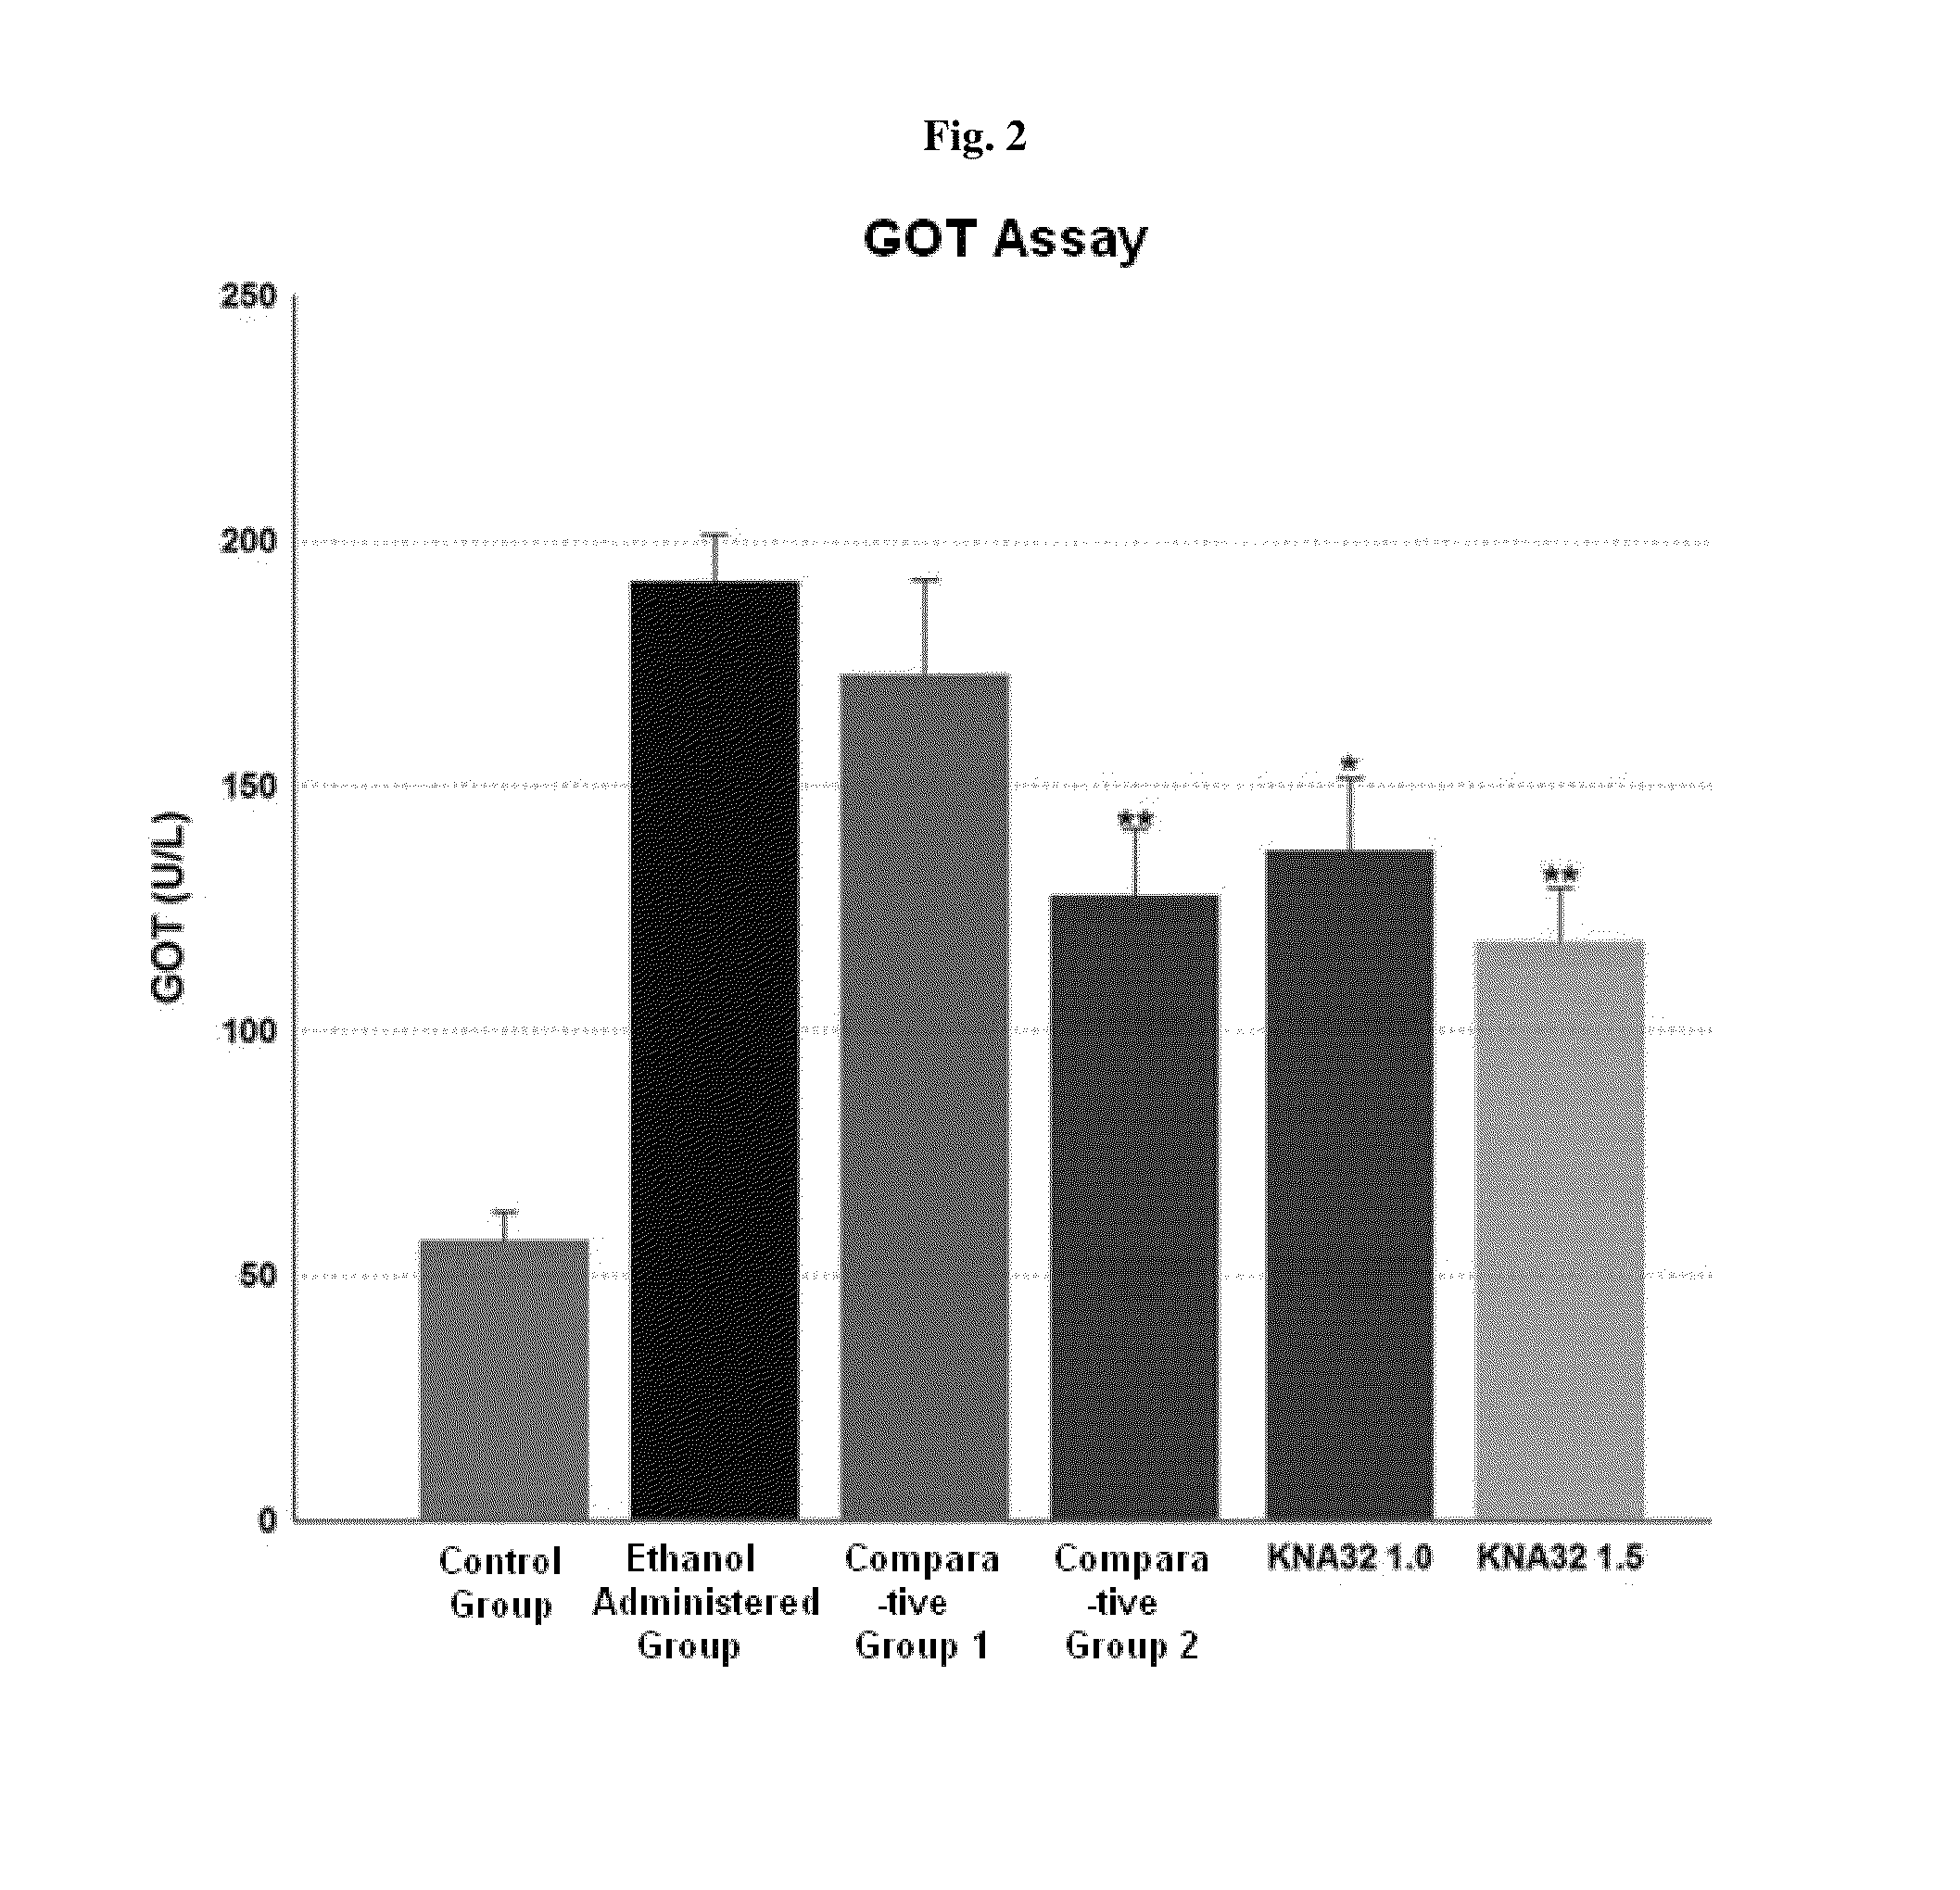 Composition for preventing and/or alleviating hangover comprising extracts of sophora flavescens